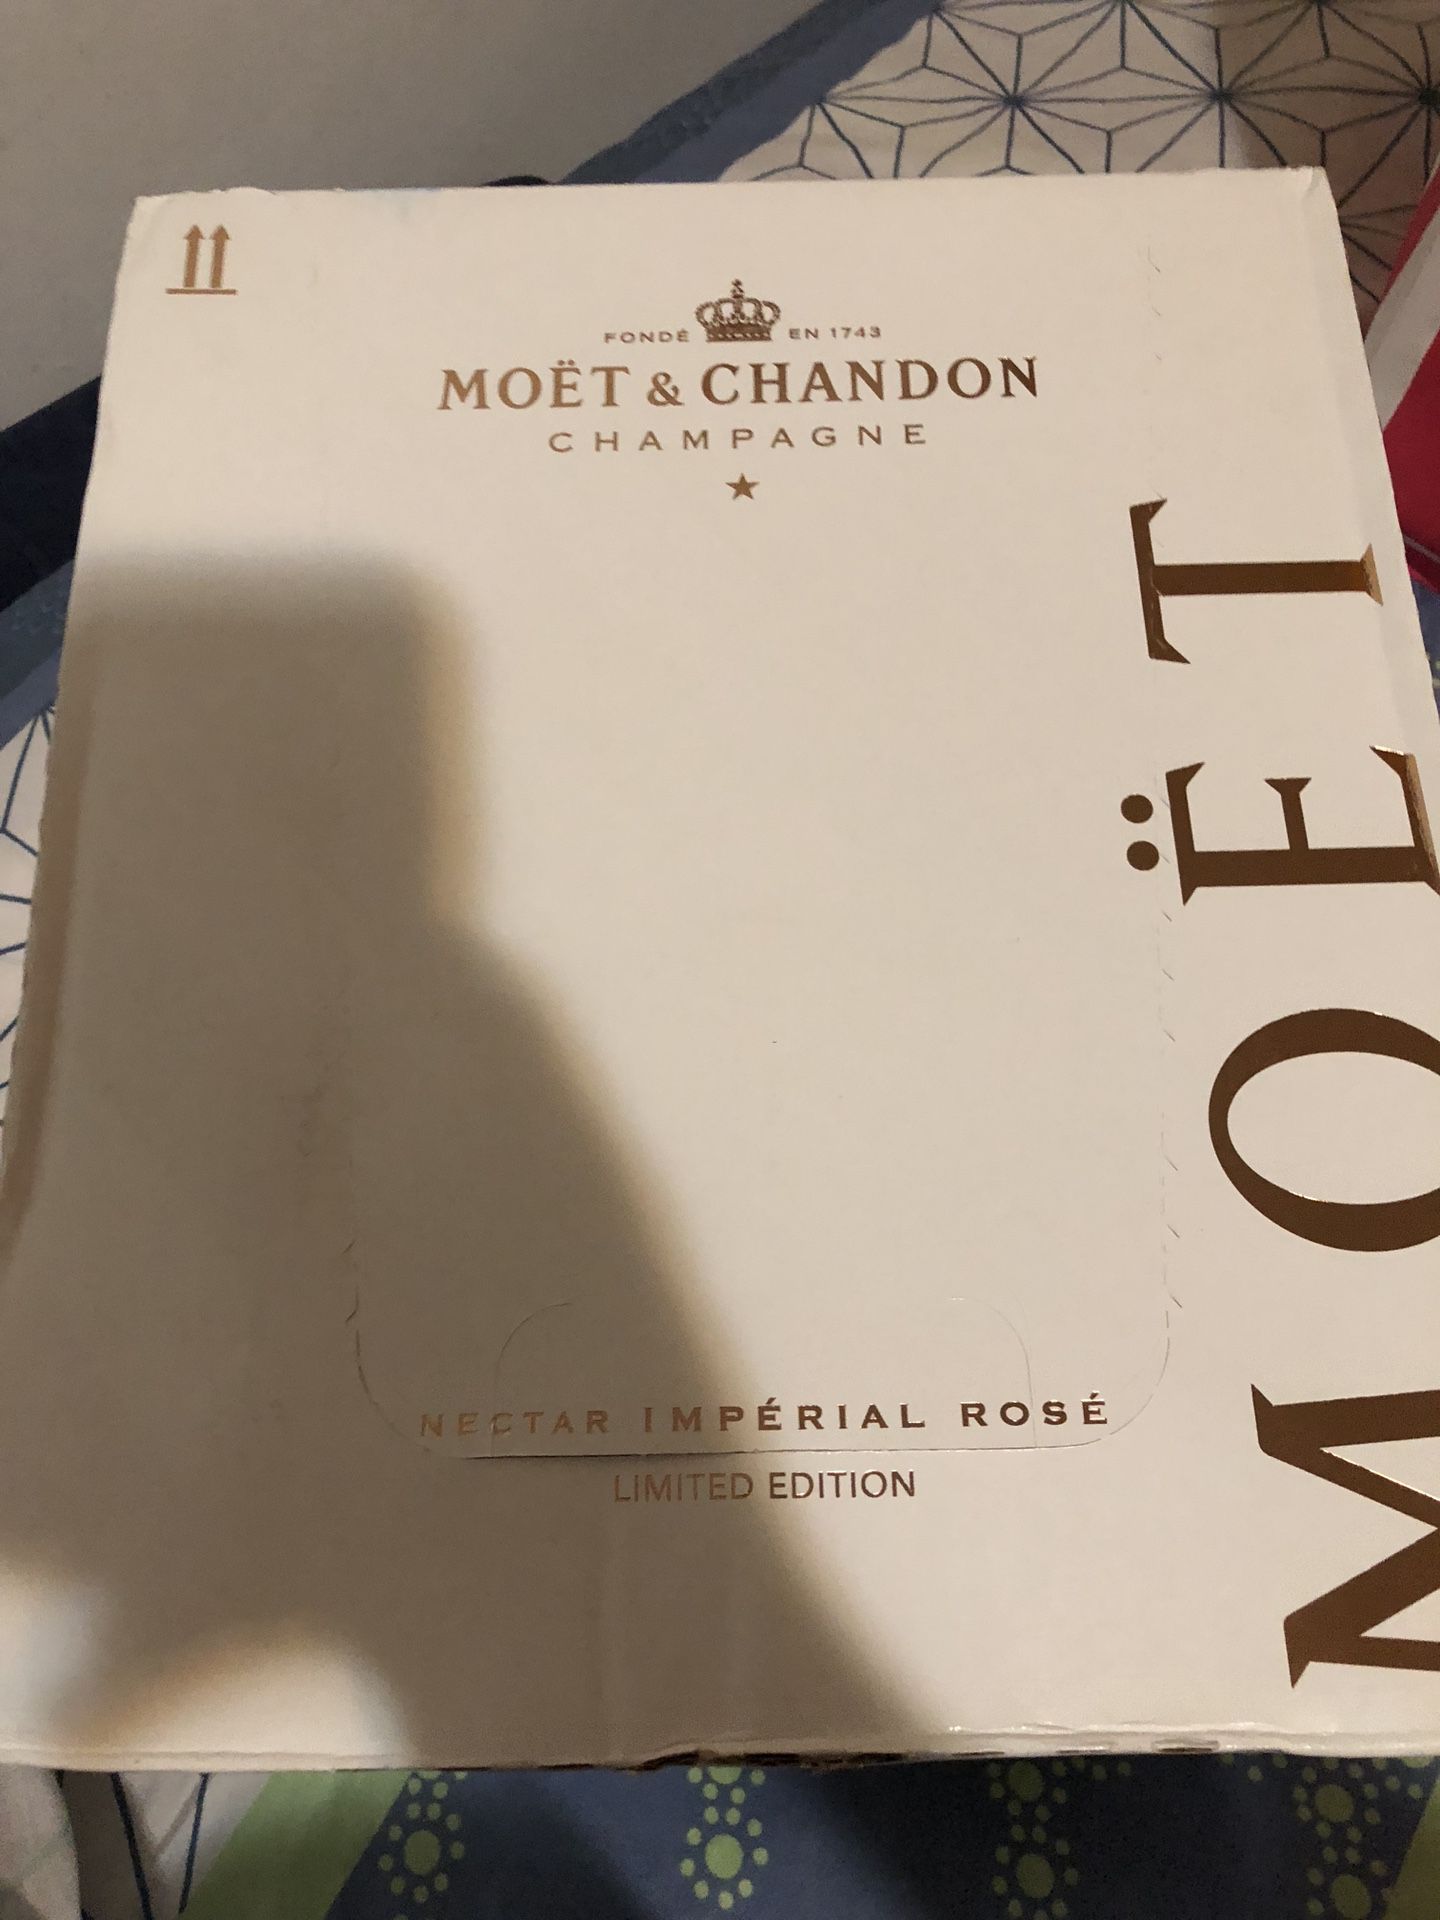 Virgil Abloh Off White “Do Not Drop” Moët Chandon Bottle Presenter  Collaboration. Does anyone know what this would be worth? It was a limited  edition run, but figured it would be worth